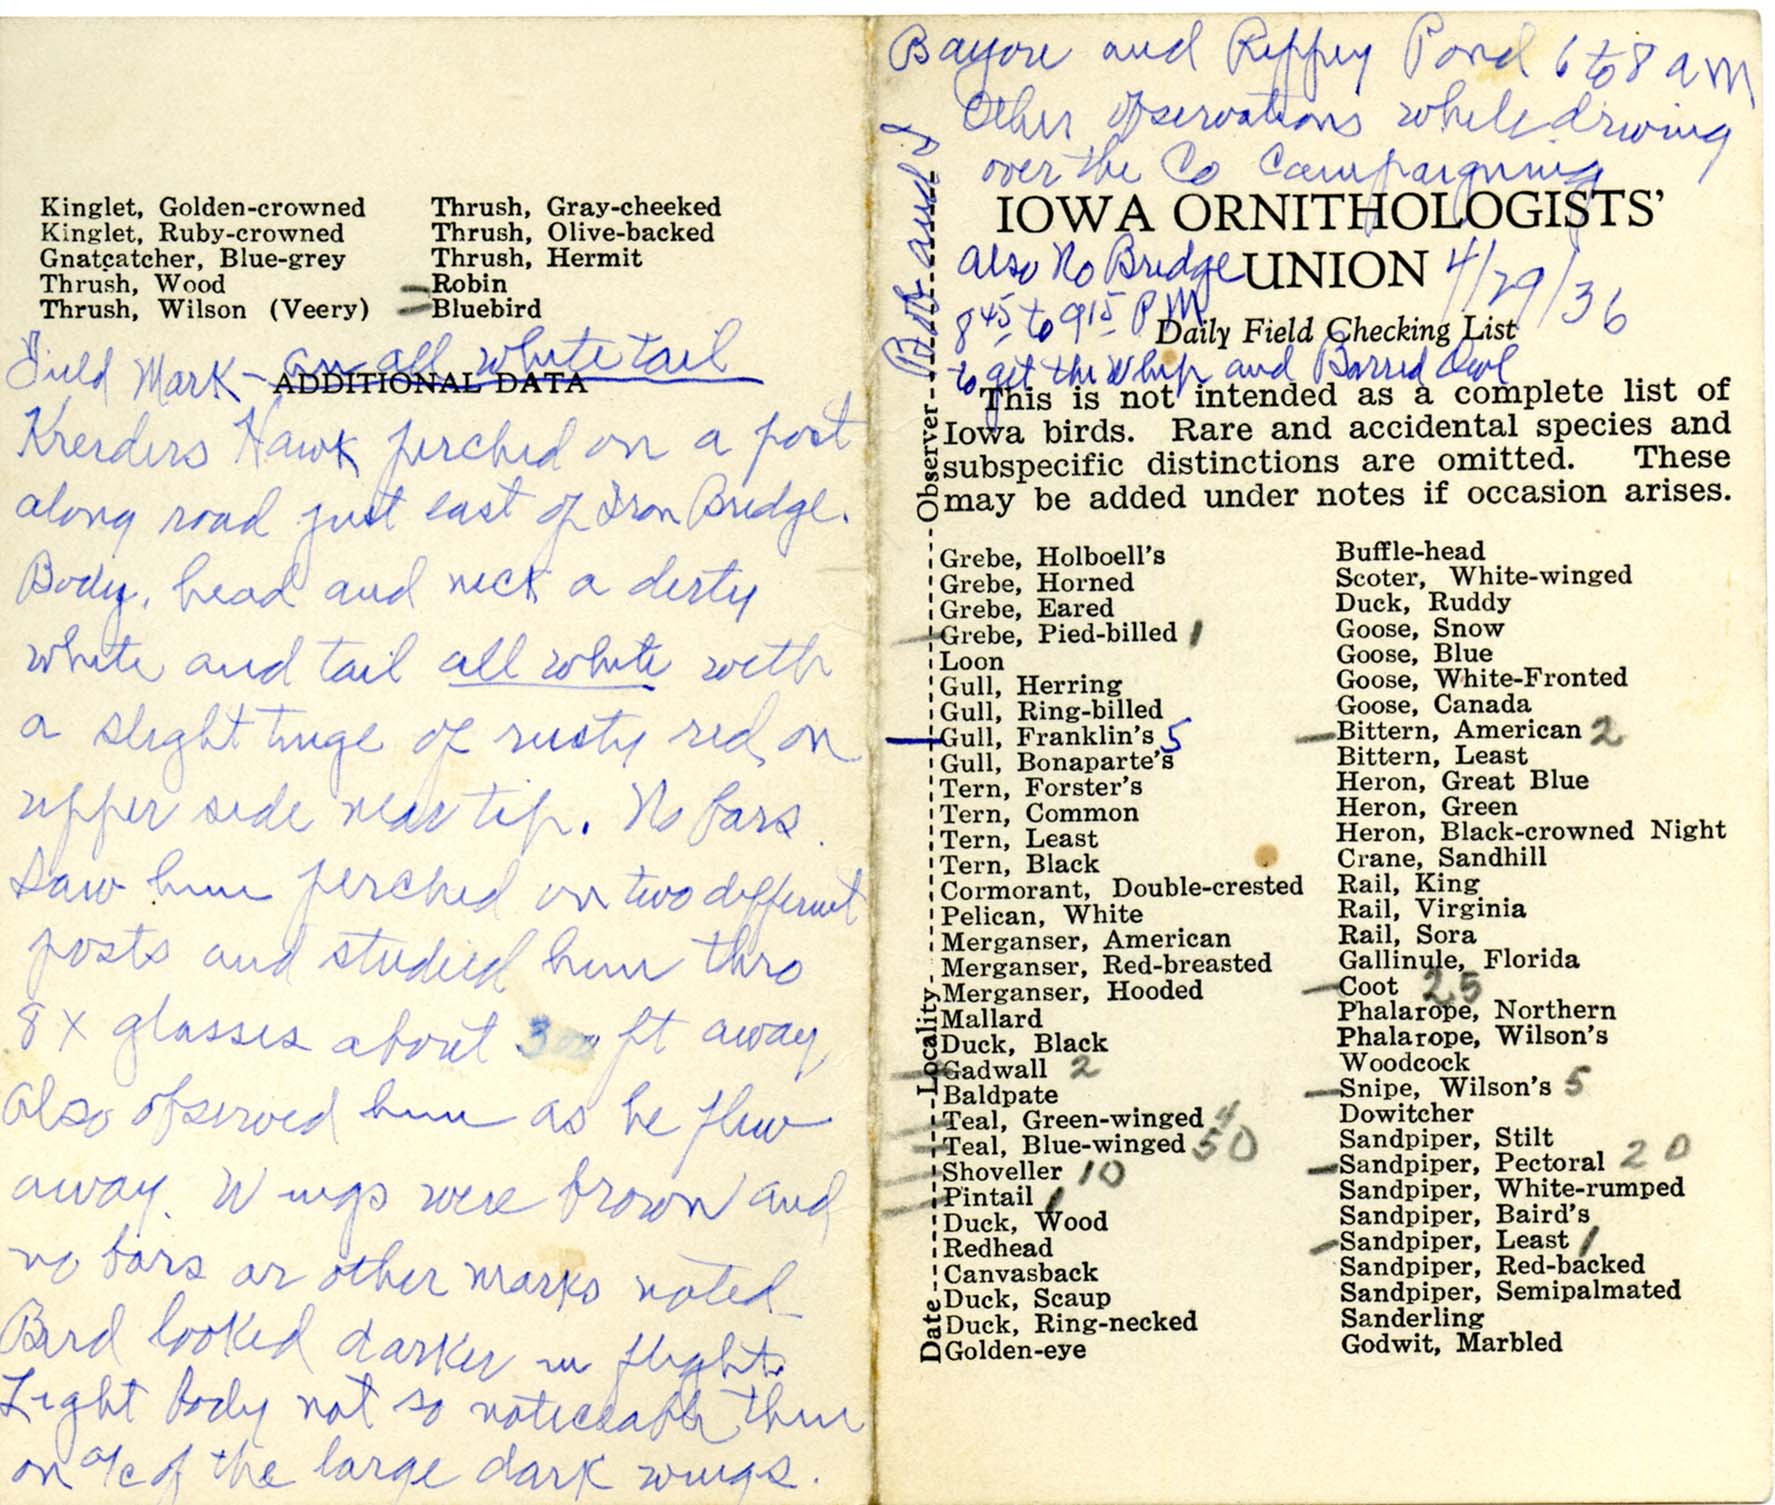 Daily field checking list by Walter Rosene, April 29, 1936